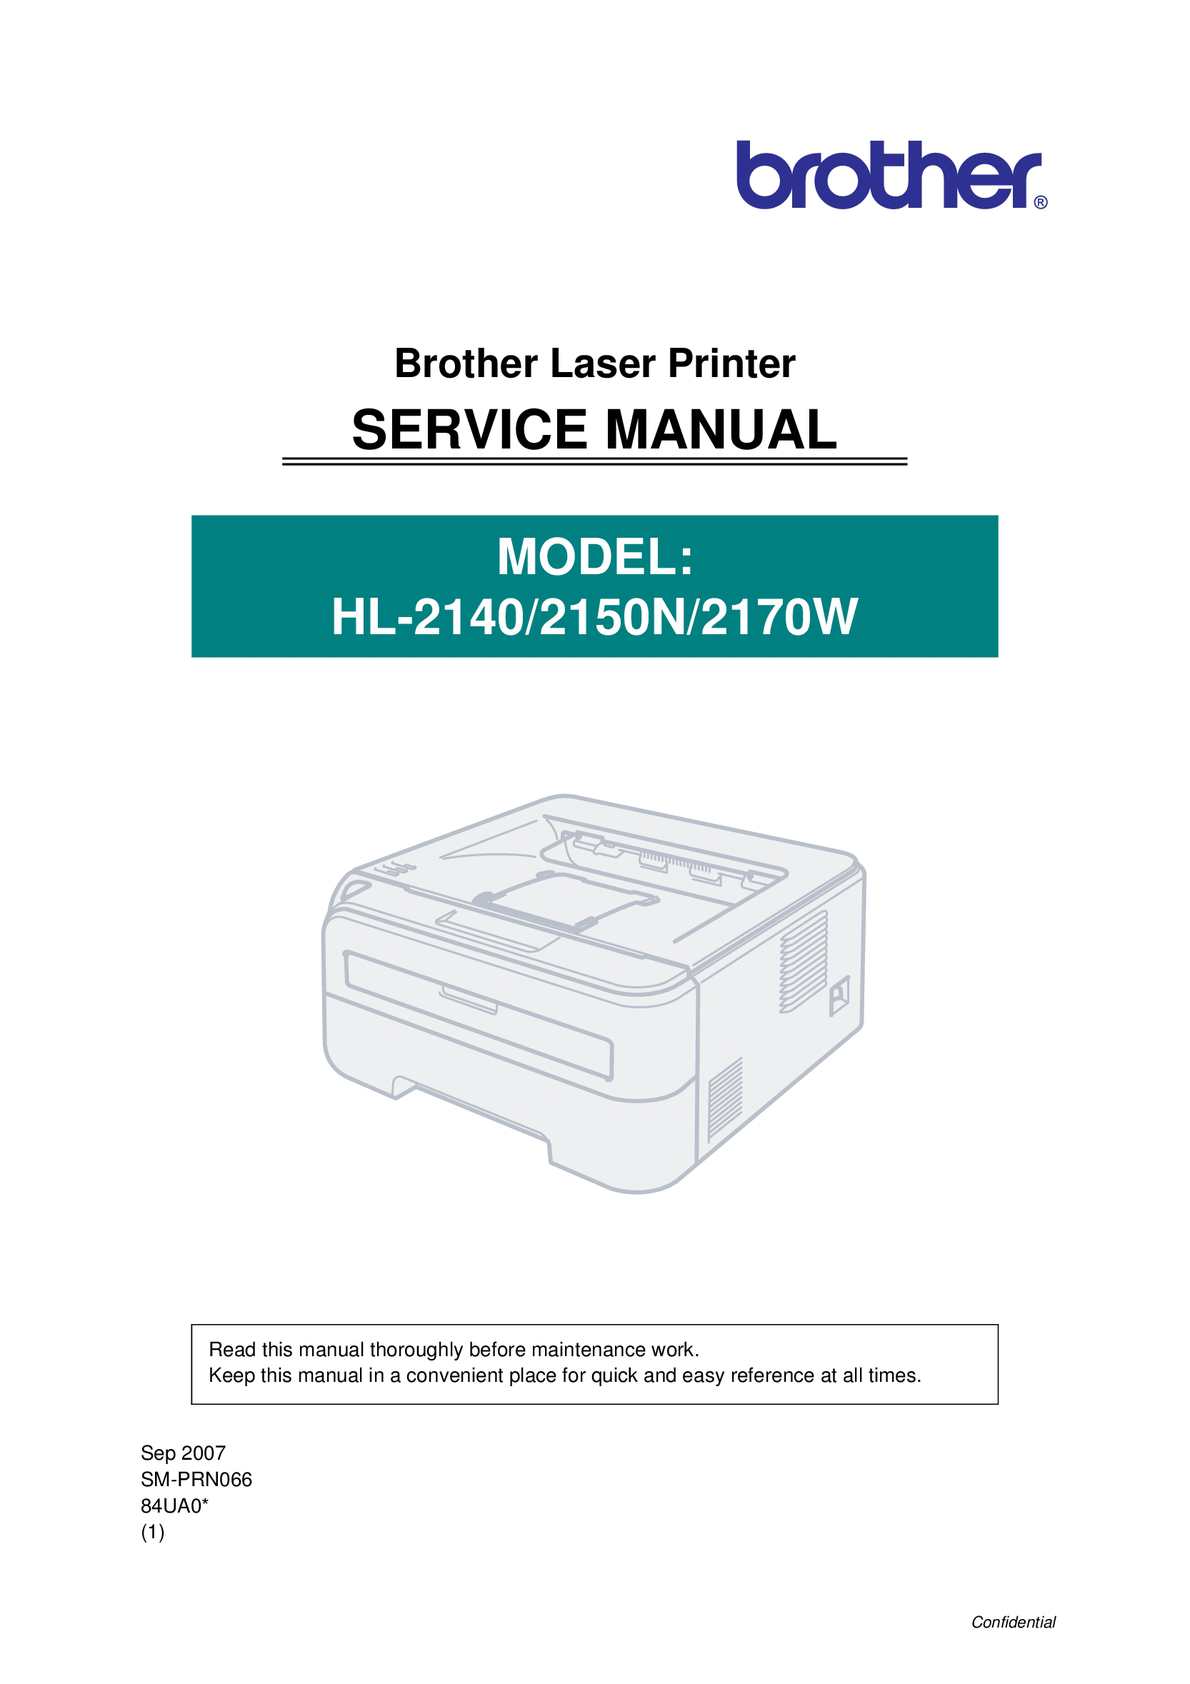 brother hl 2140 laser troubleshooting